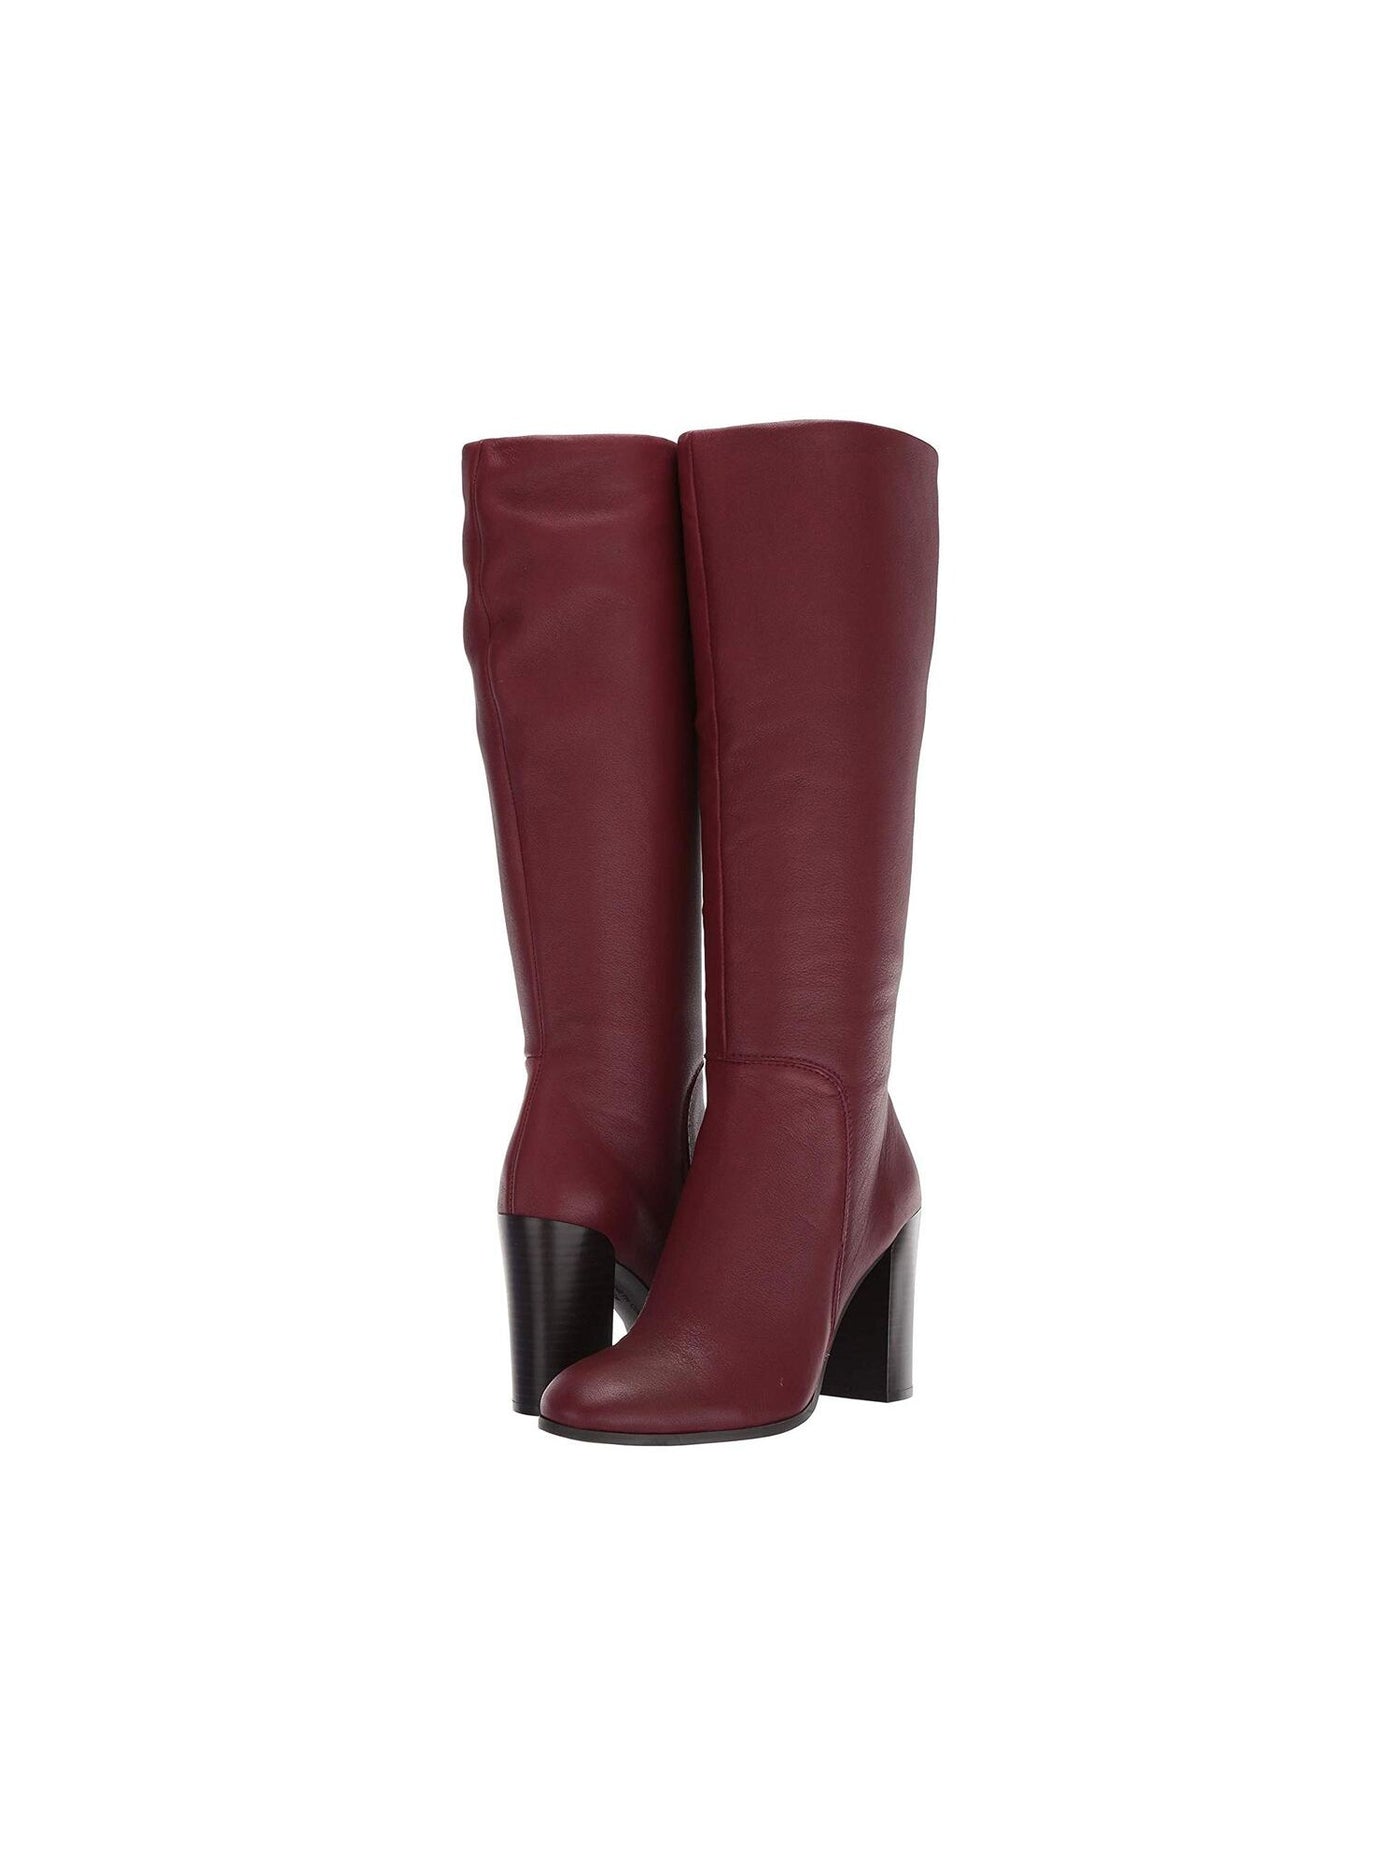 KENNETH COLE NEW YORK Womens Maroon Stretch Gore Padded Justin Round Toe Block Heel Zip-Up Leather Dress Riding Boot 5 M